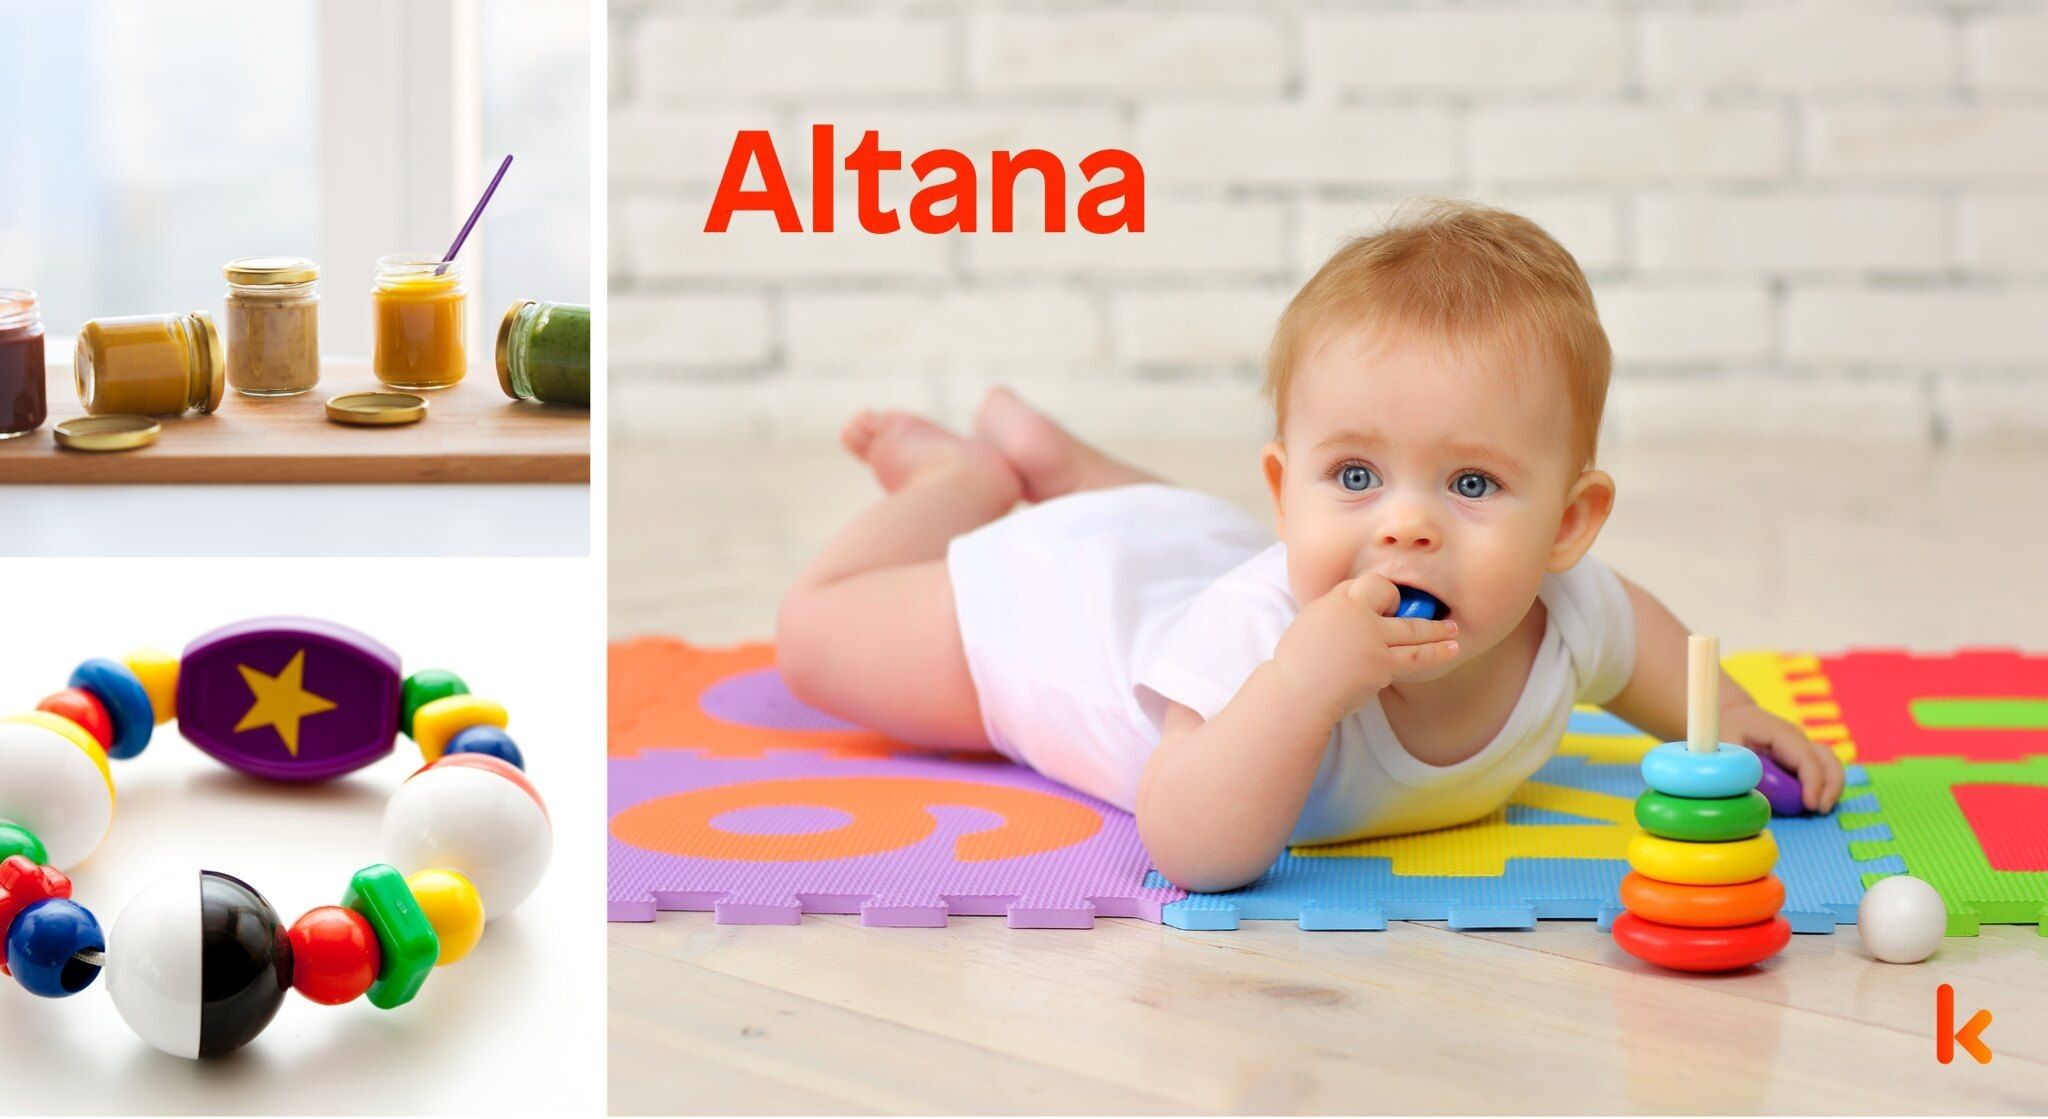 Meaning of the name Altana